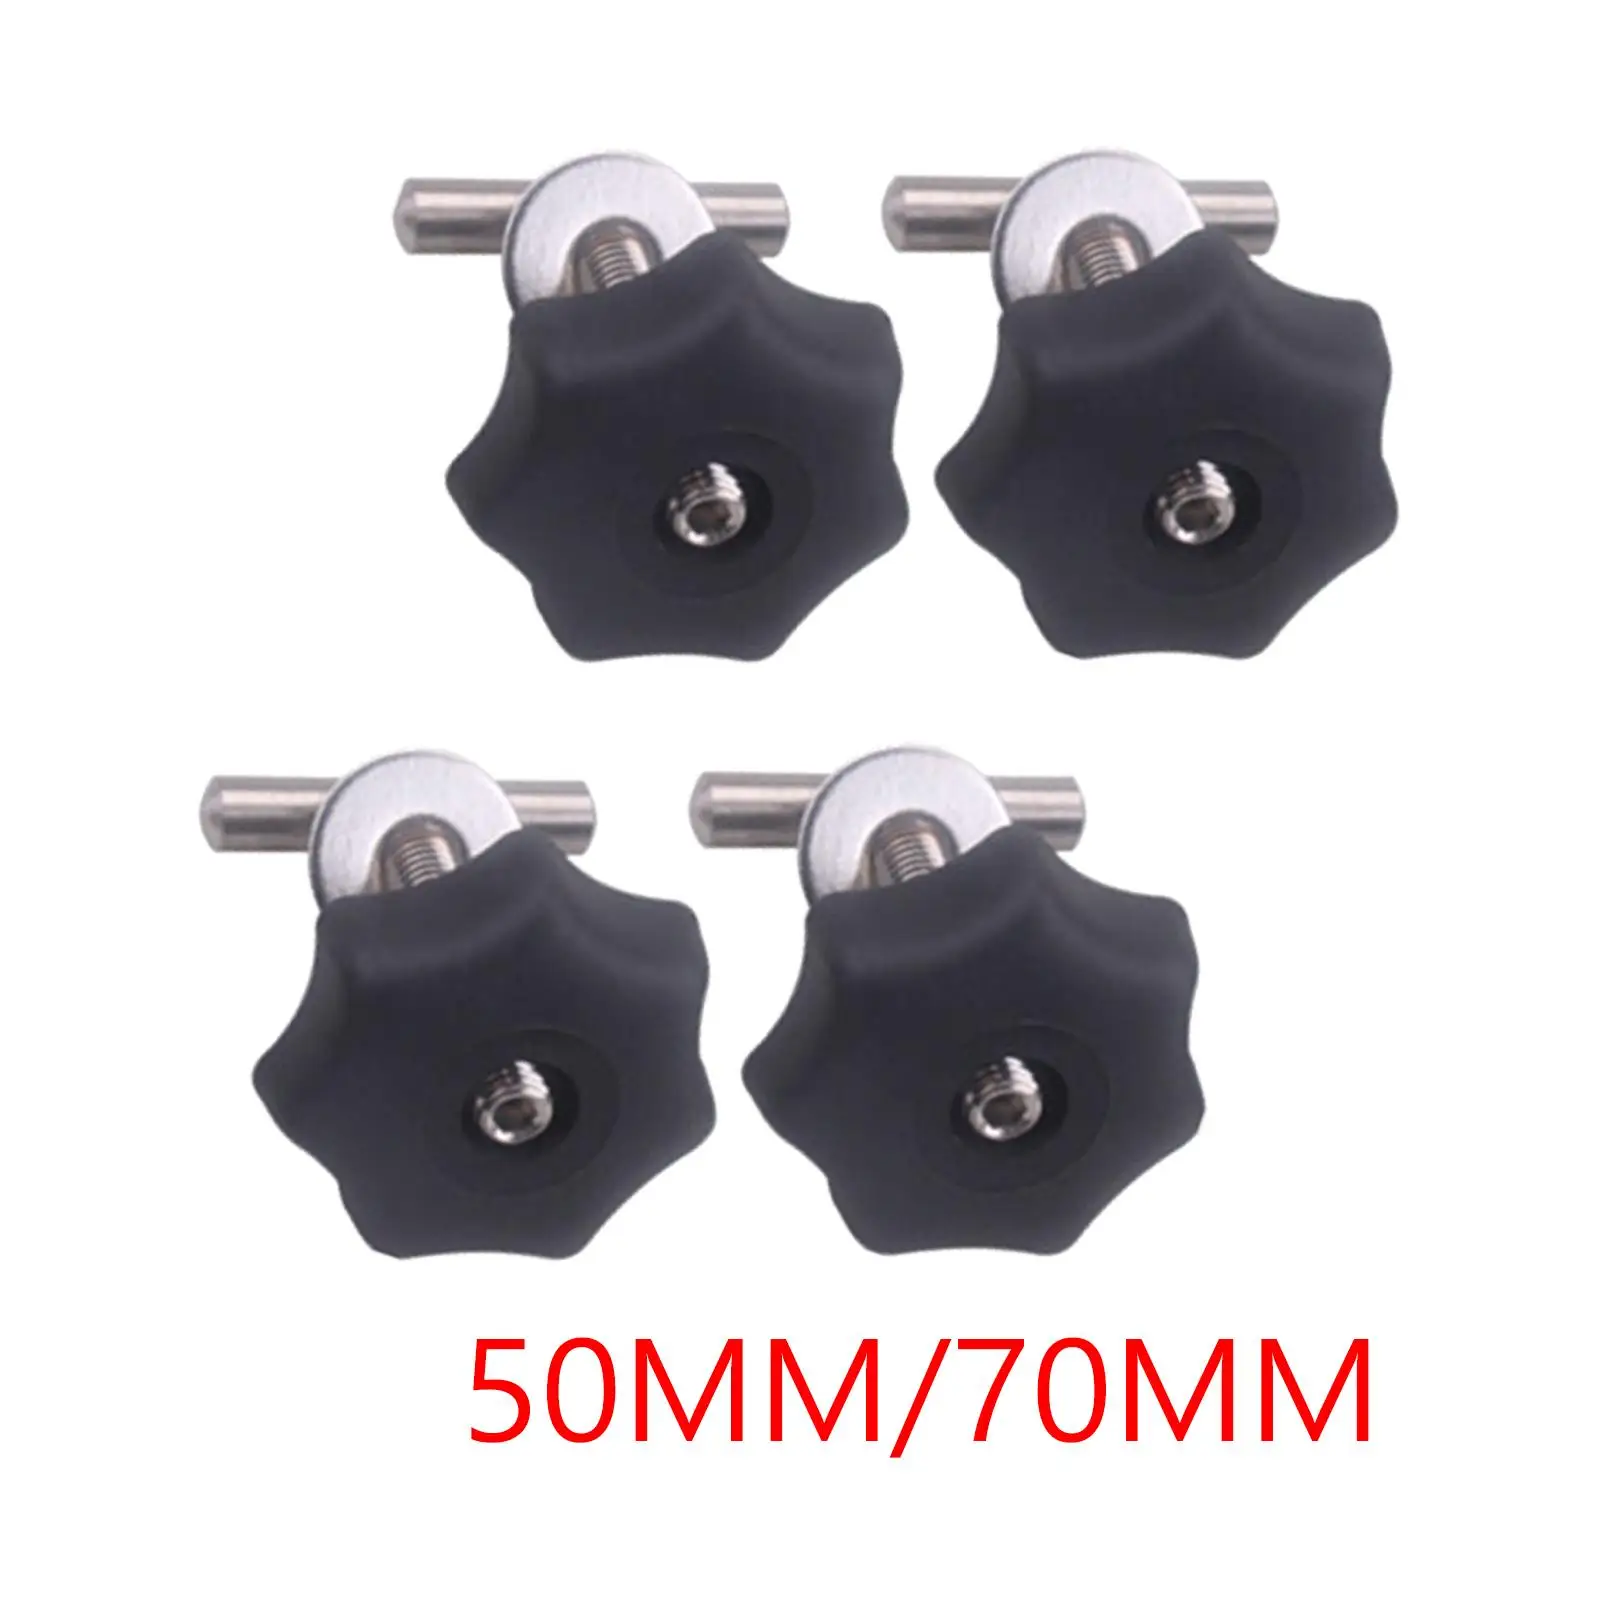 4pcs Locking Rail Bolts Mounting Bolts Solid Nut Set Durable 50mm/70mm for T5